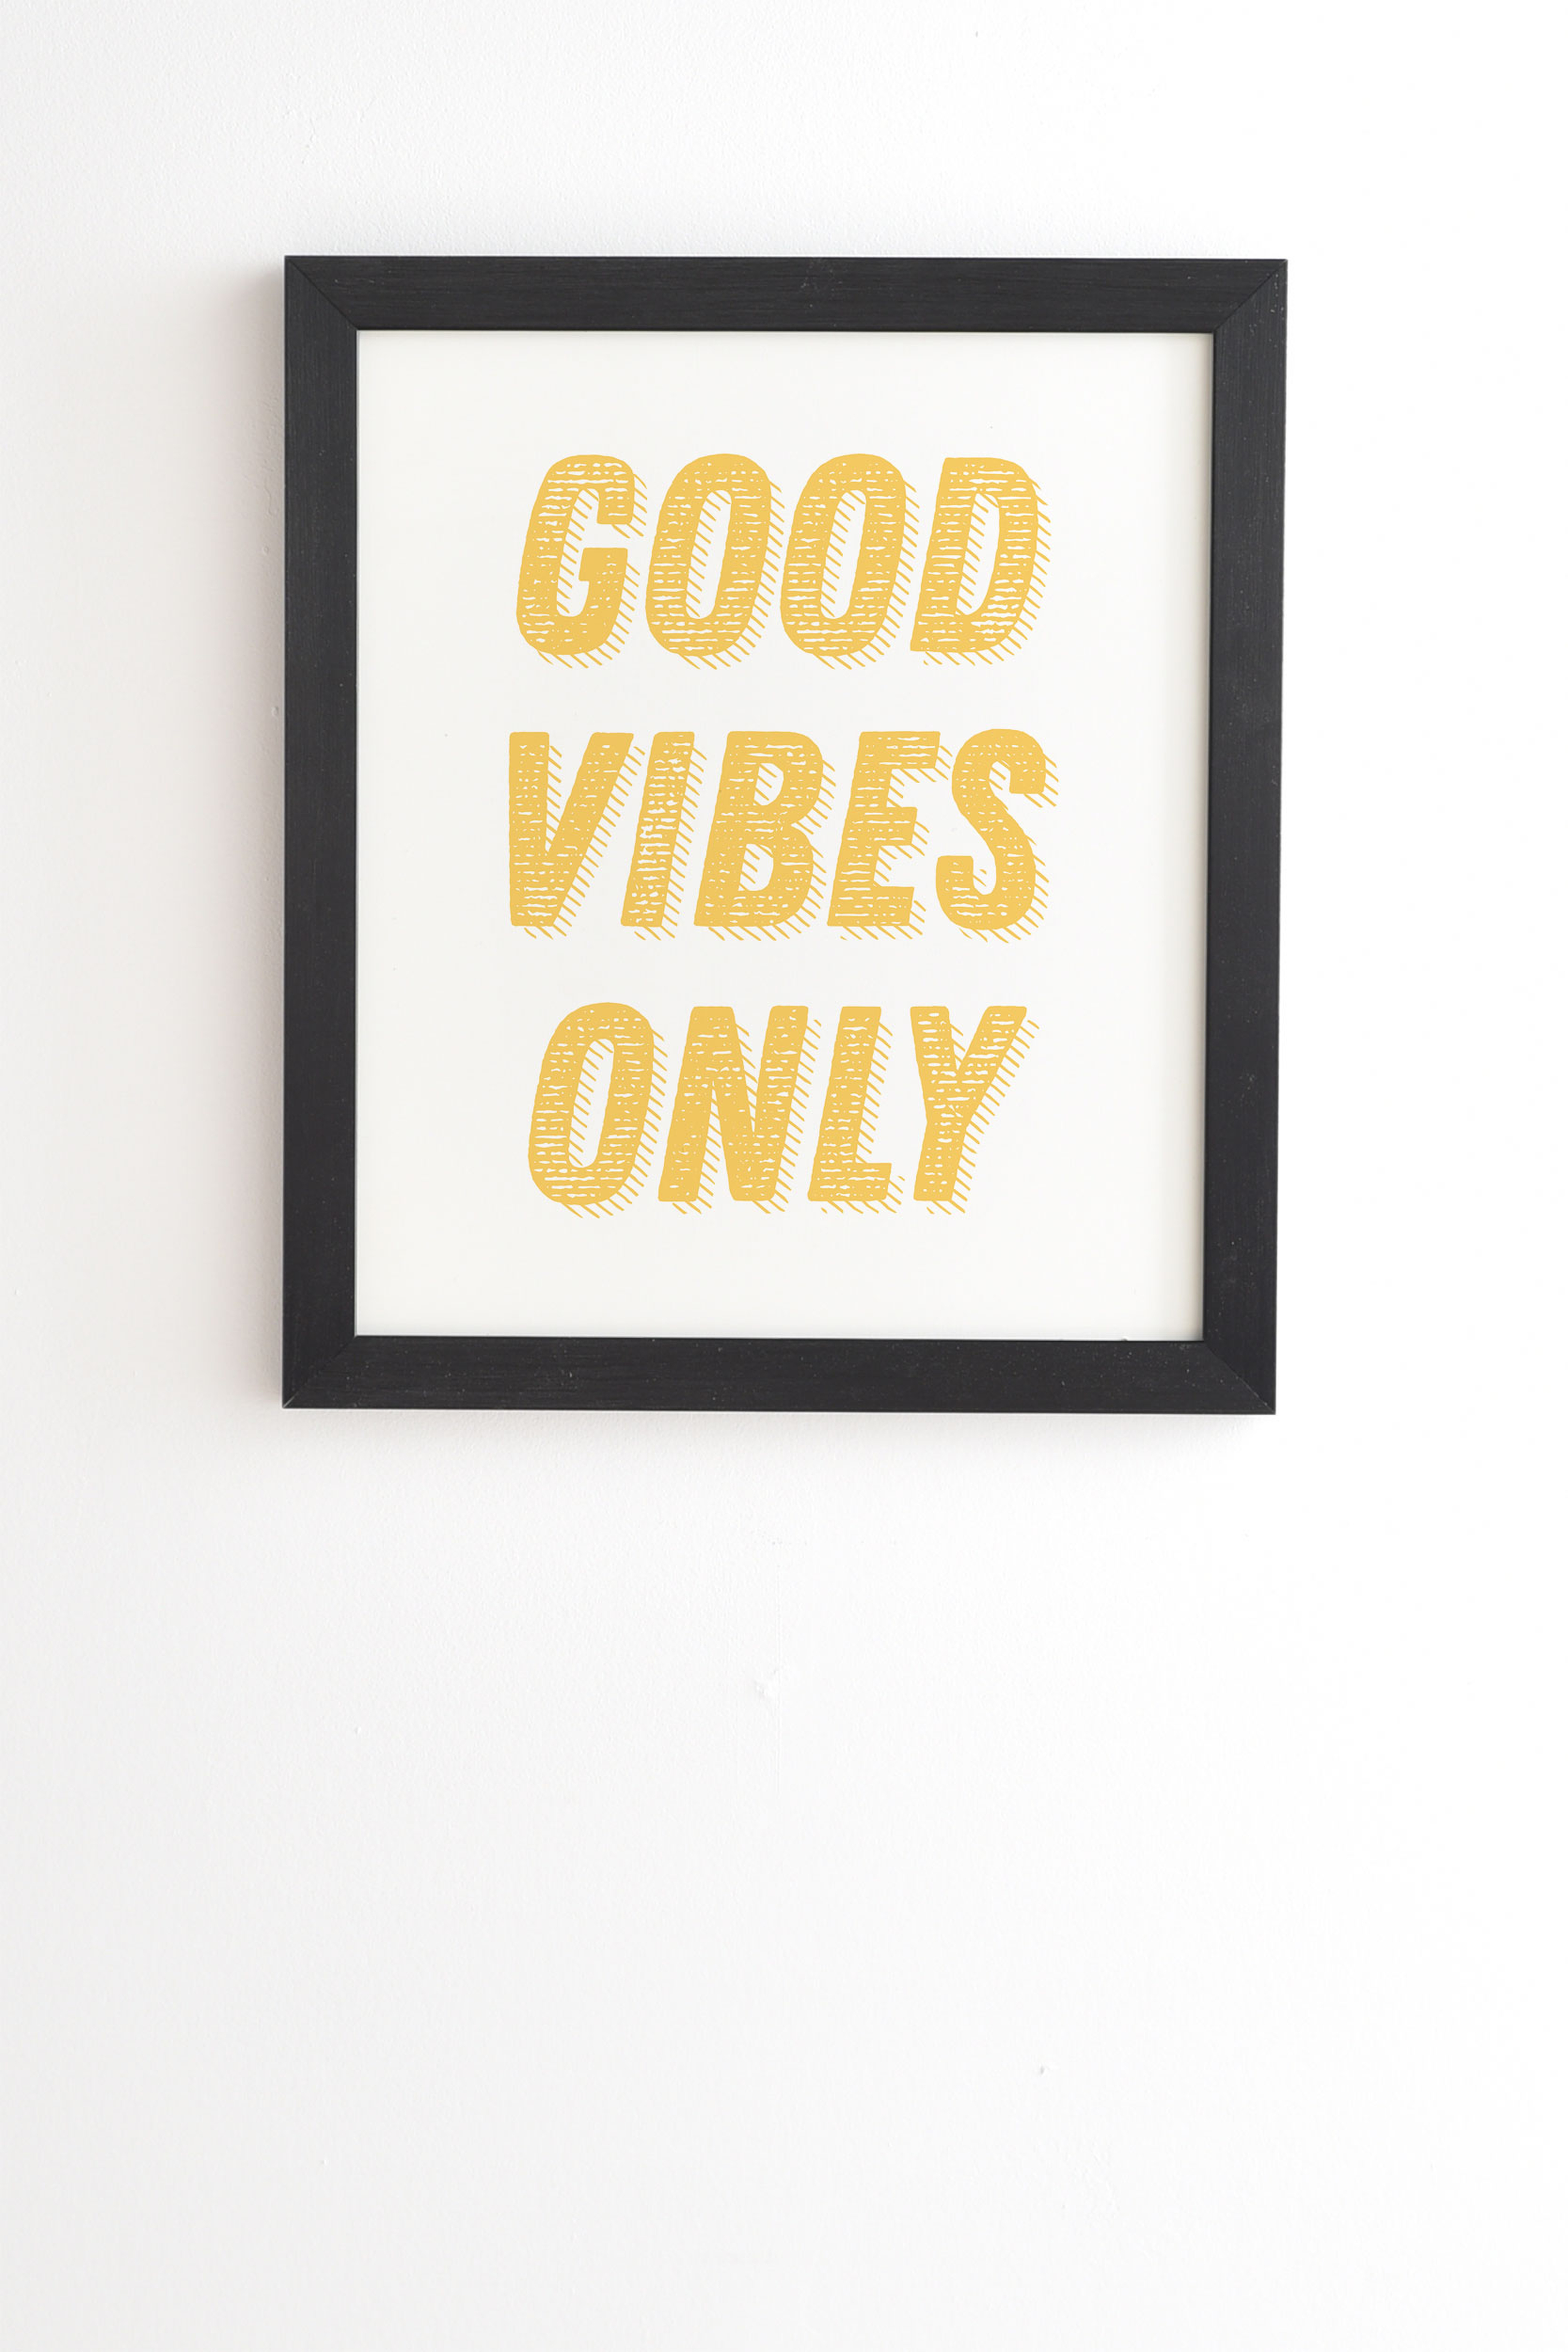 Good Vibes Only Bold Typograph by June Journal - Framed Wall Art Basic Black 8" x 9.5" - Wander Print Co.